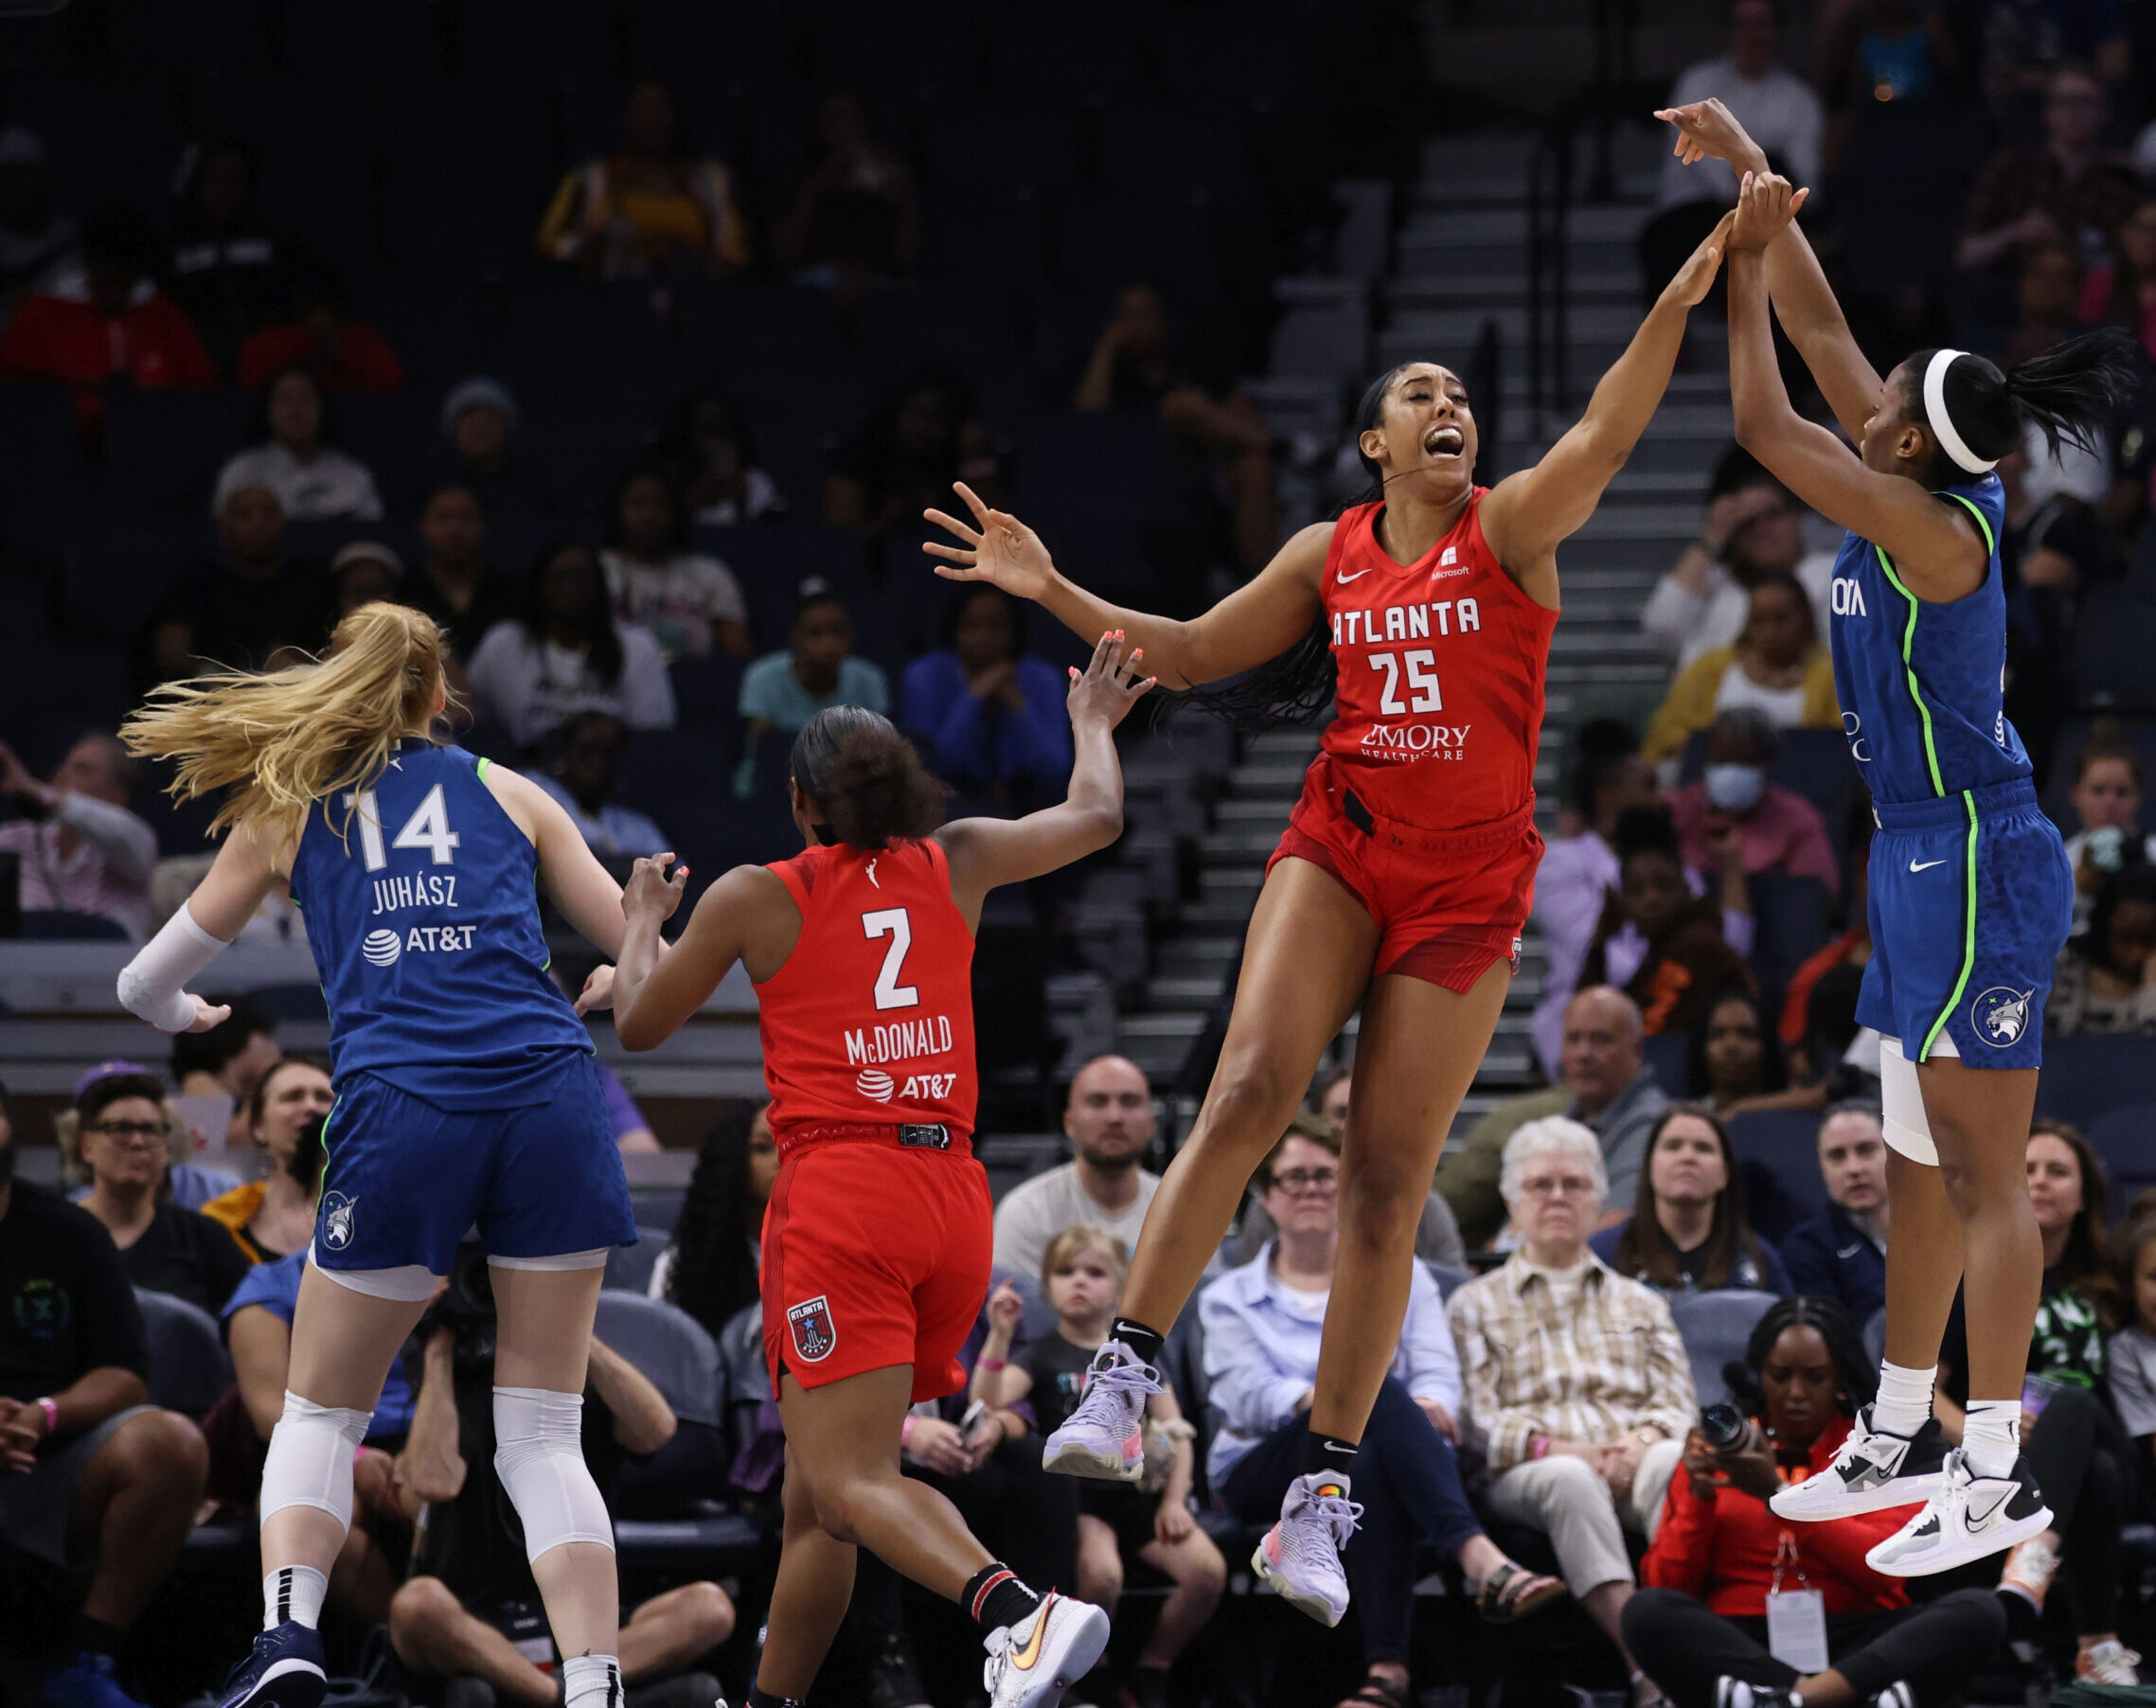 Atlanta Dream pushing for playoffs with new faces, and a new vibe